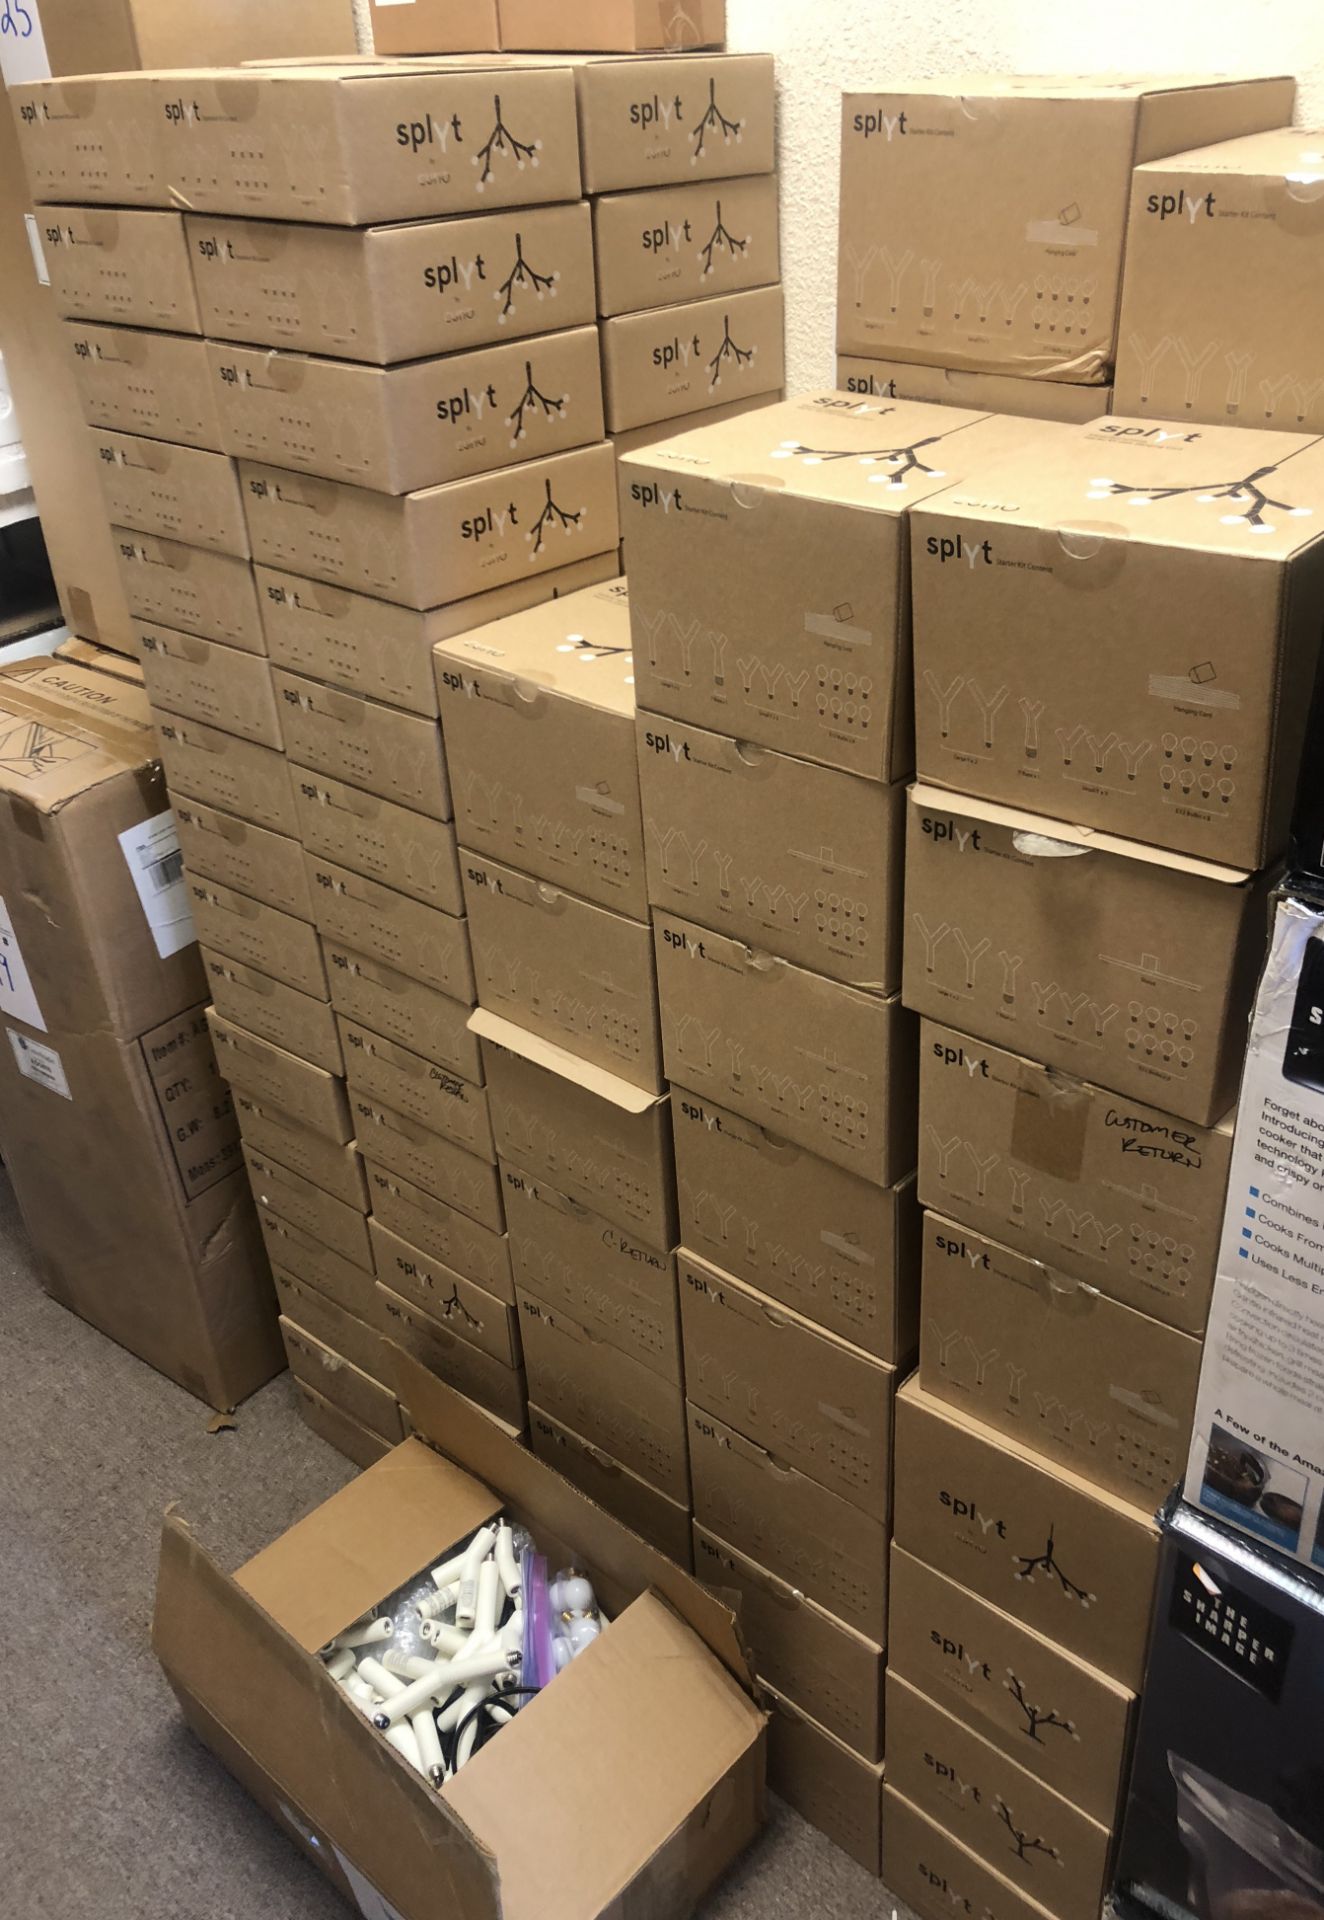 140 BOXES OF SPLYT DECORATIVE LIGHTING SYSTEMS $20,000 RETAIL VALUE PACKAGE - Image 2 of 6